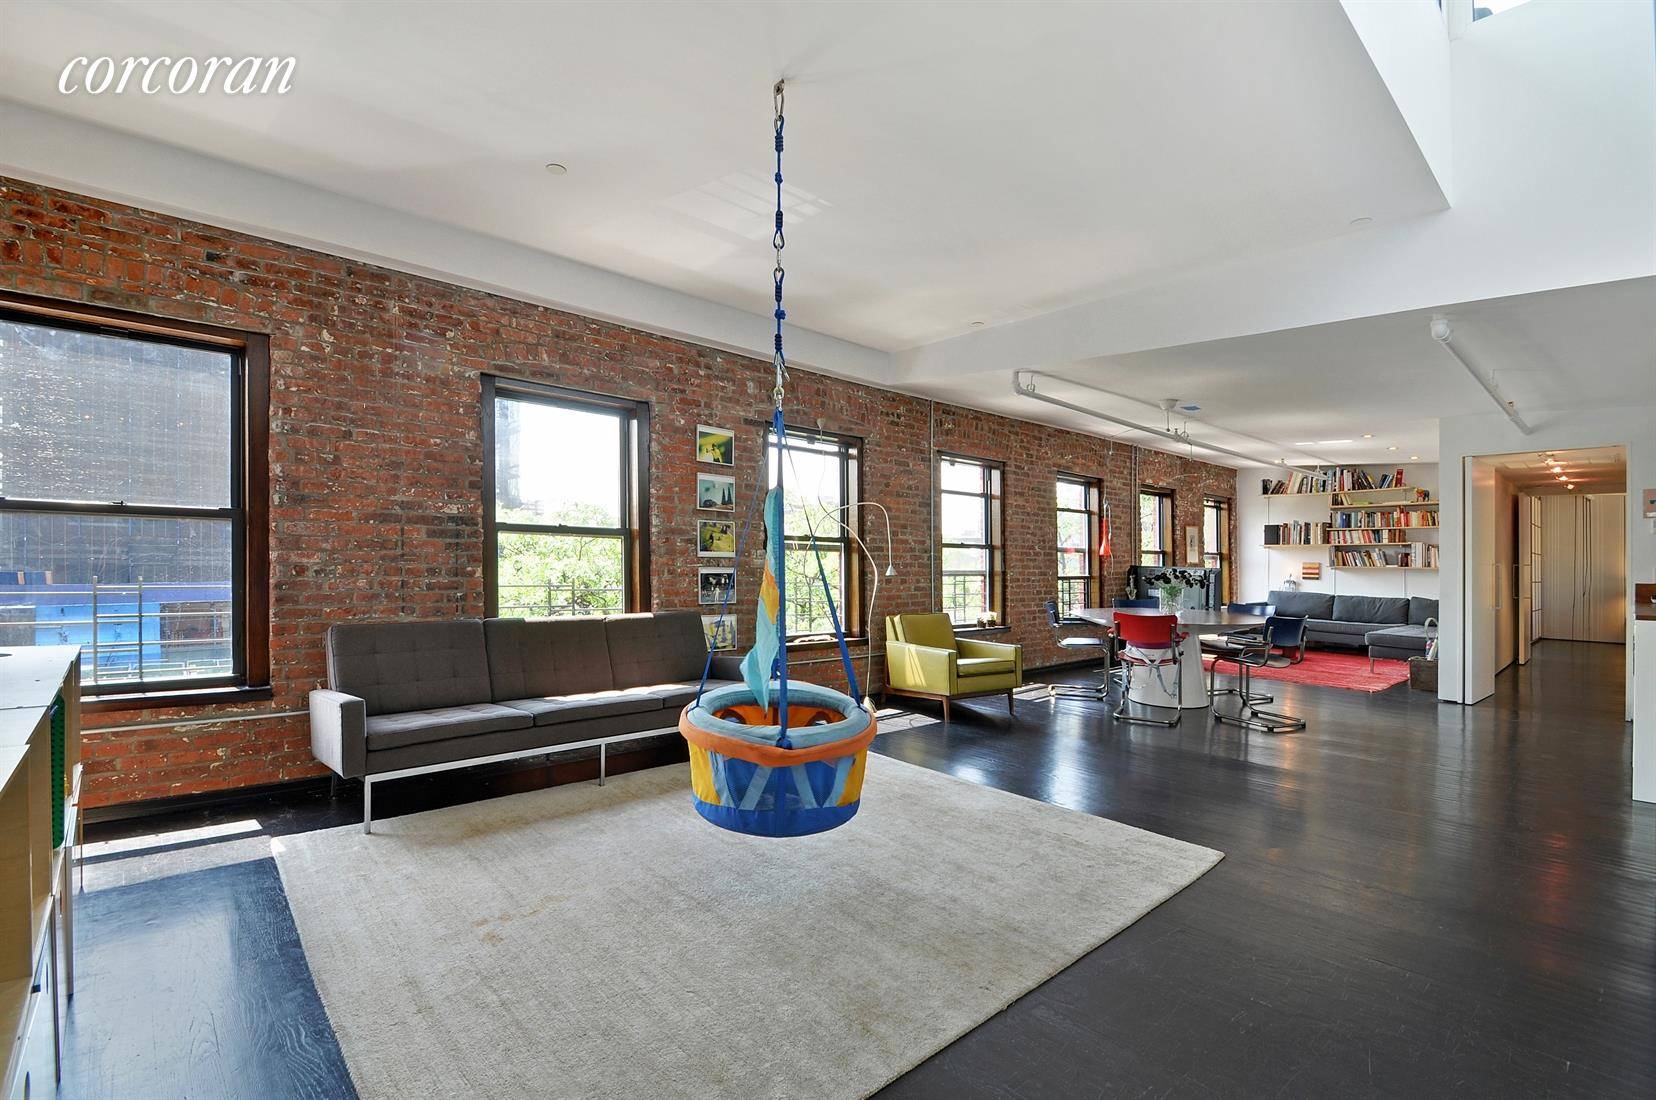 For September 1st Boutique Loft Living At its Absolute Finest.